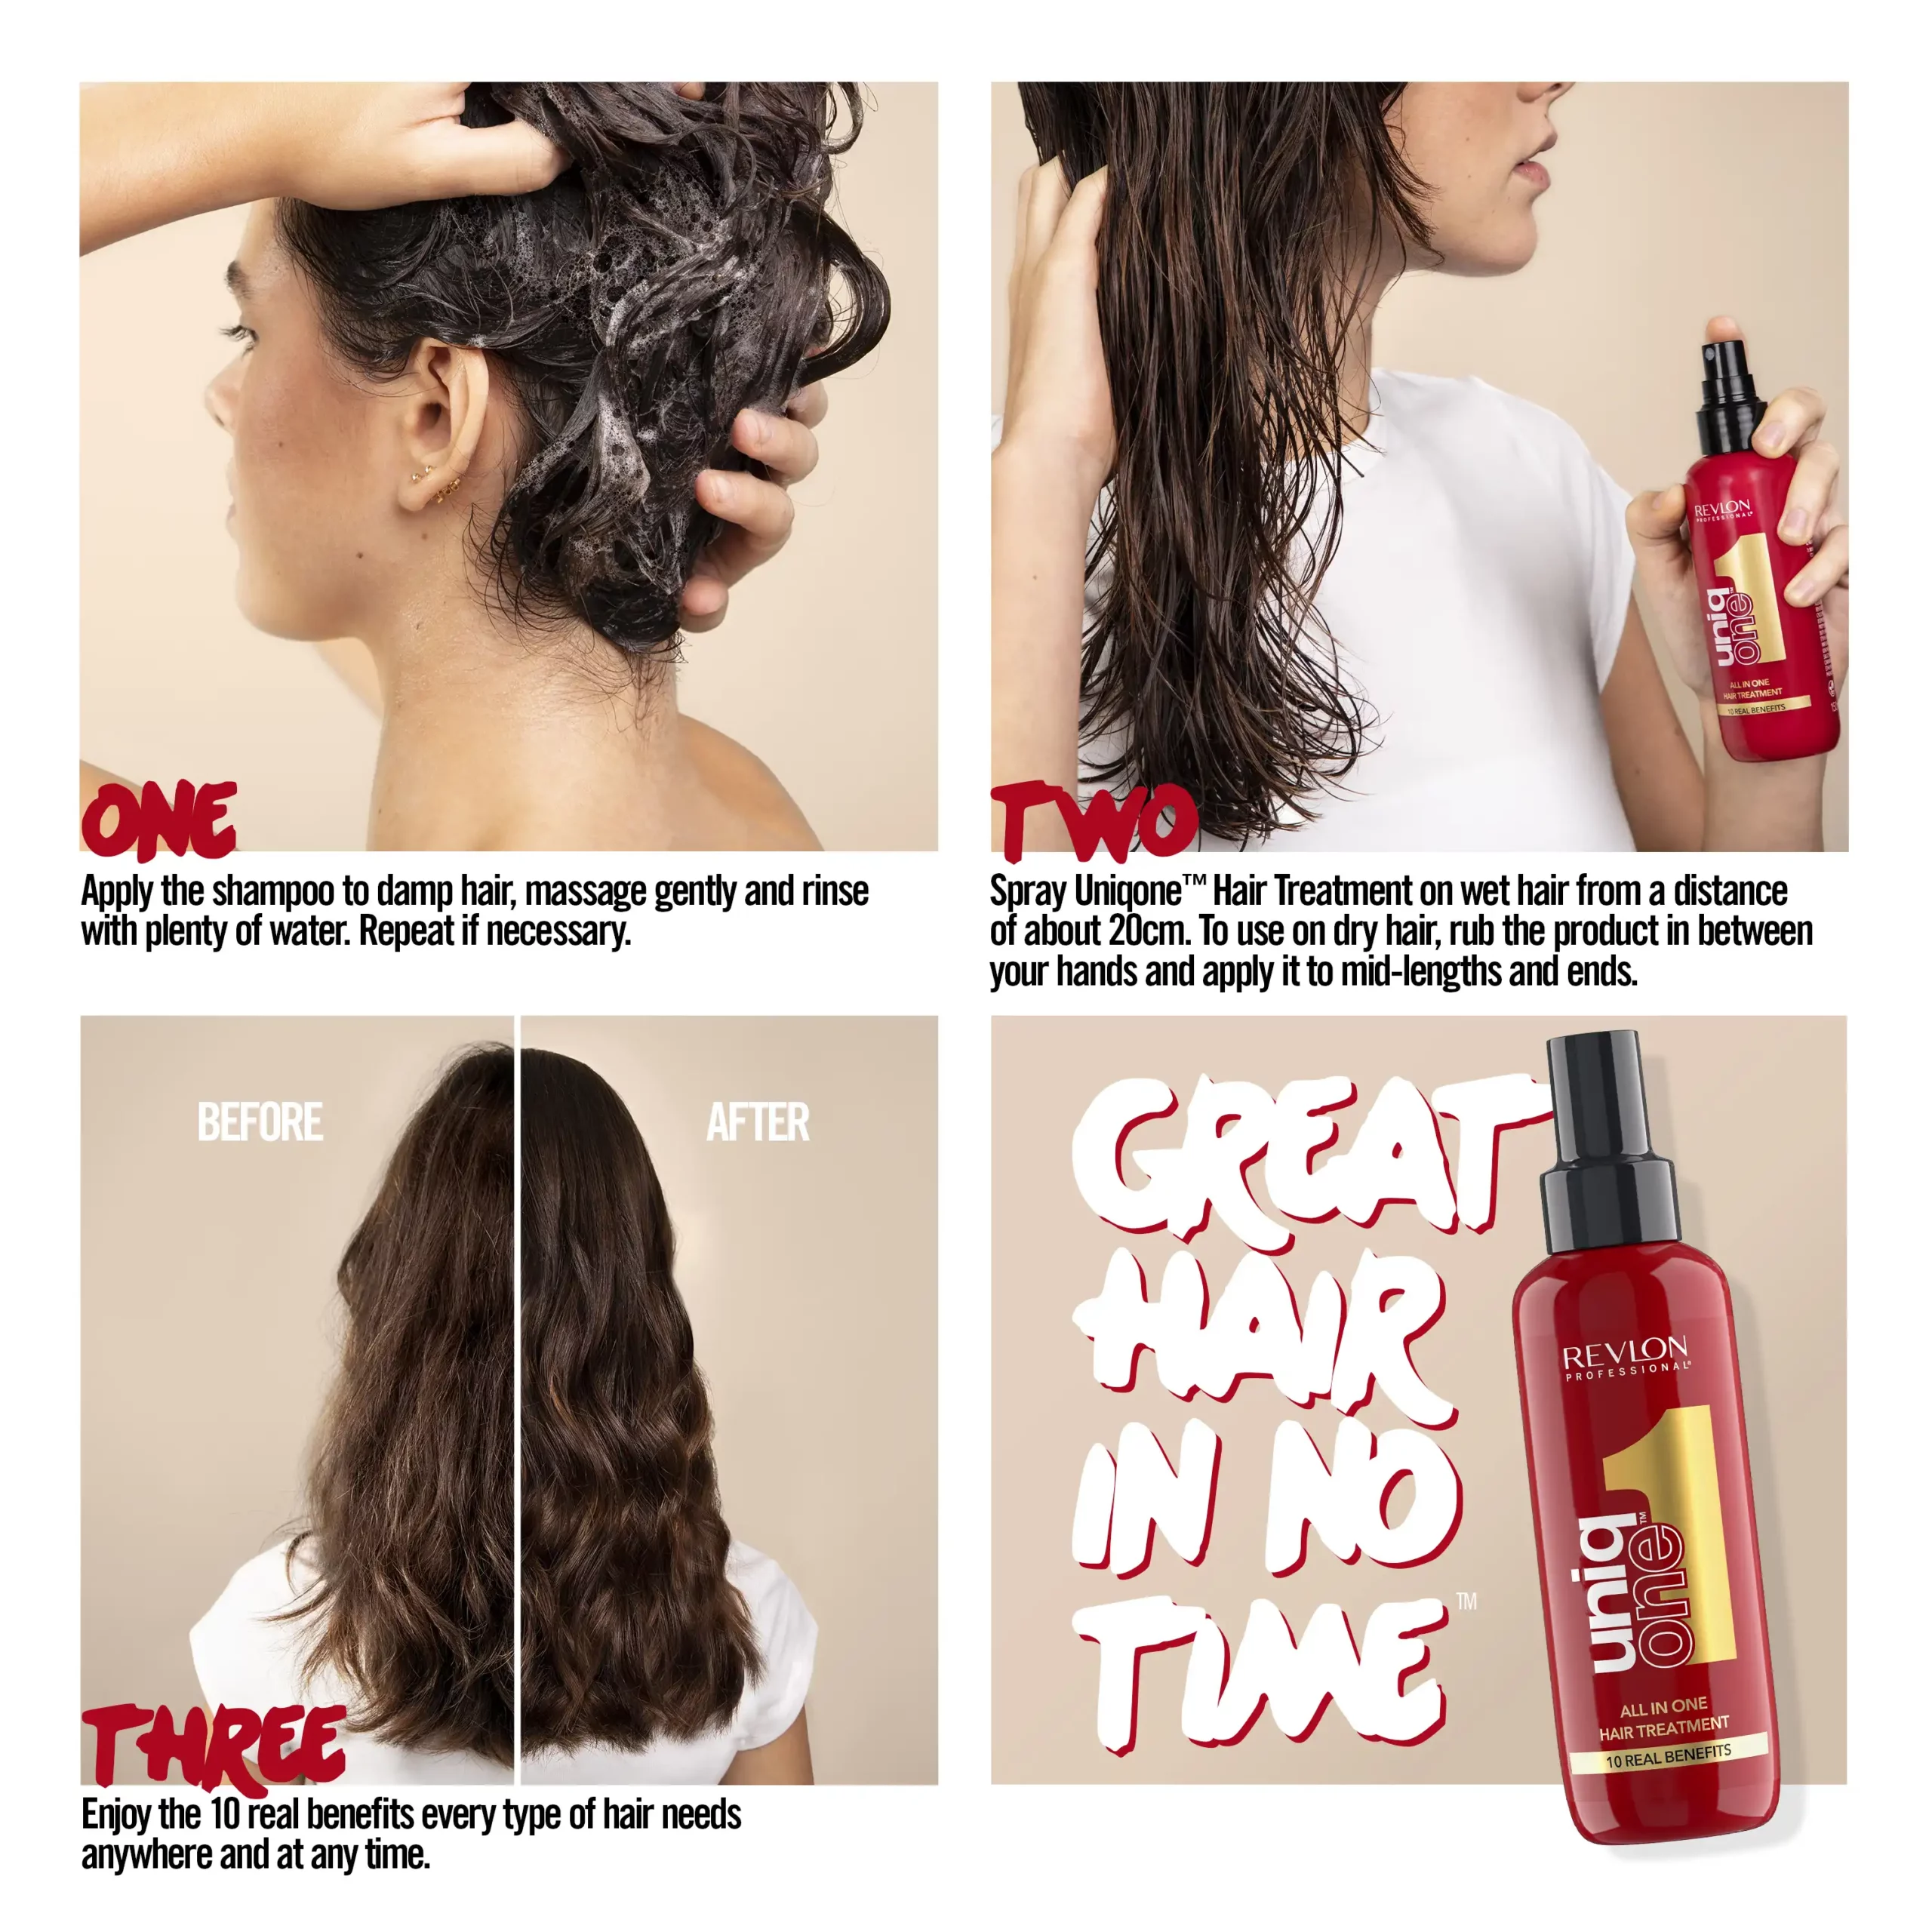 How to use Uniqone Hair Treatment